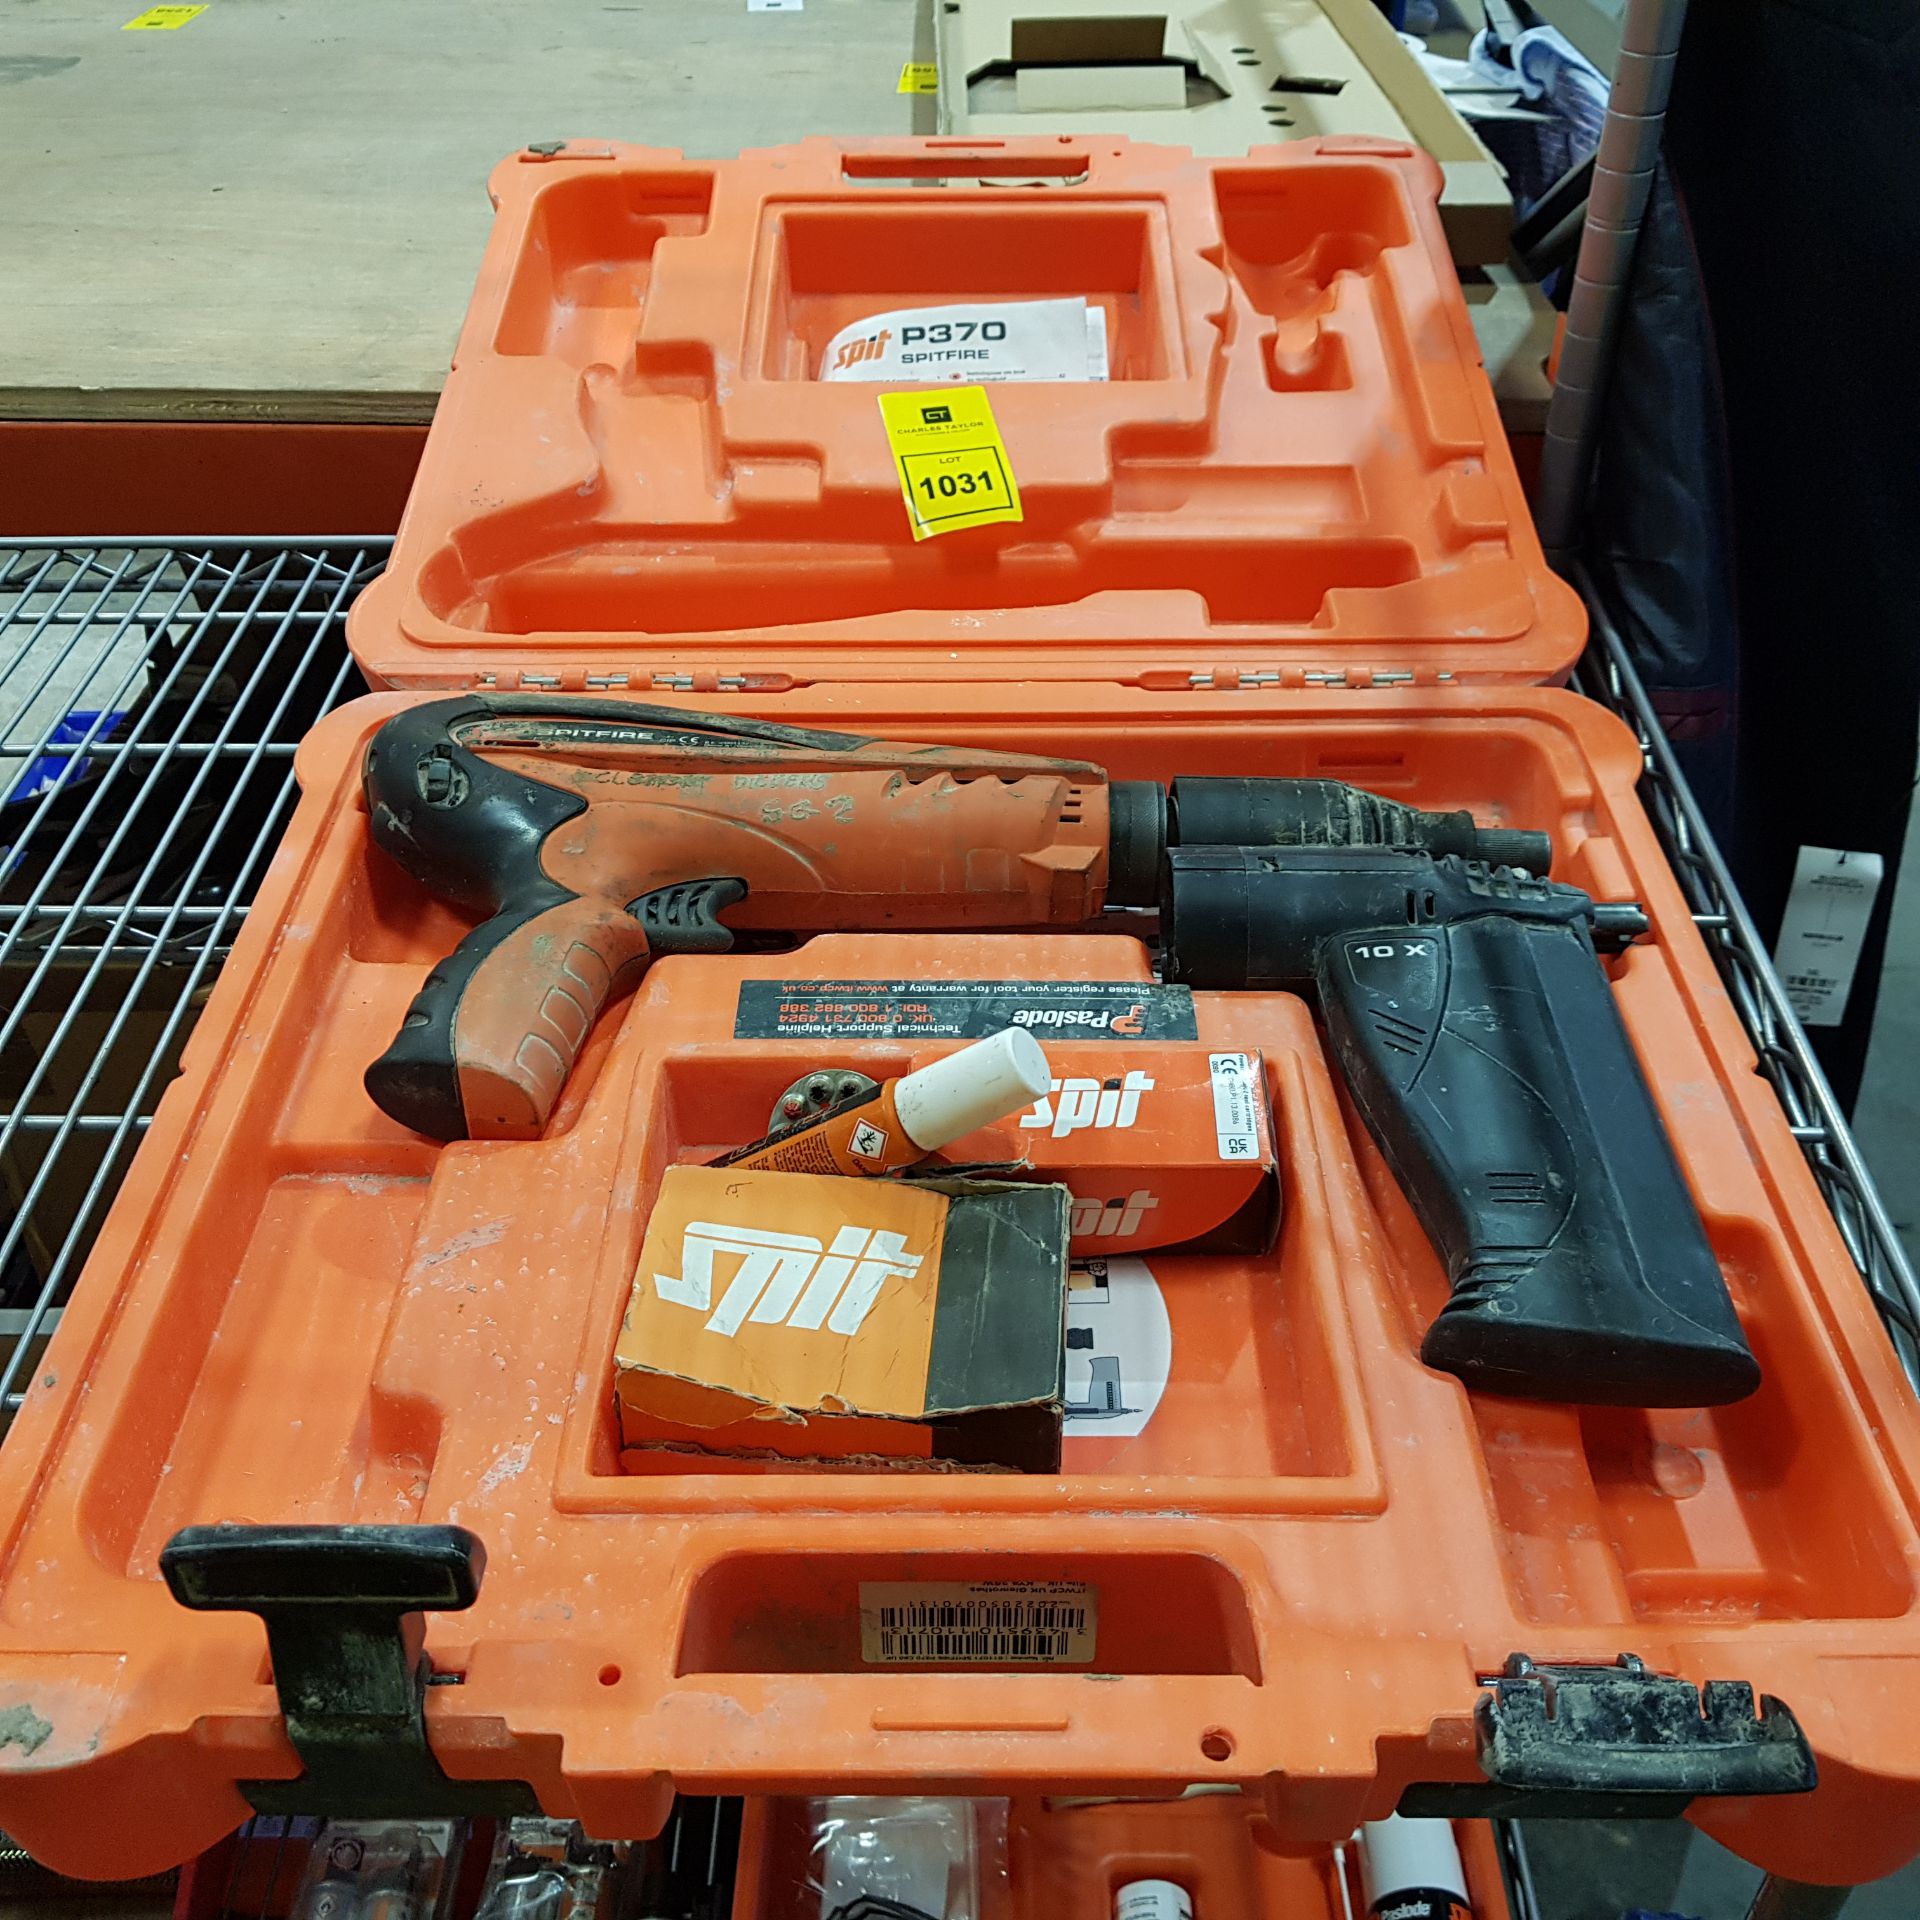 1 X PASLODE ( P370 ) SPITFIRE NAIL GUN - INCLUDES CARRY CASE) - ( PLEASE NOTE THIS IS NOT TESTED ) (